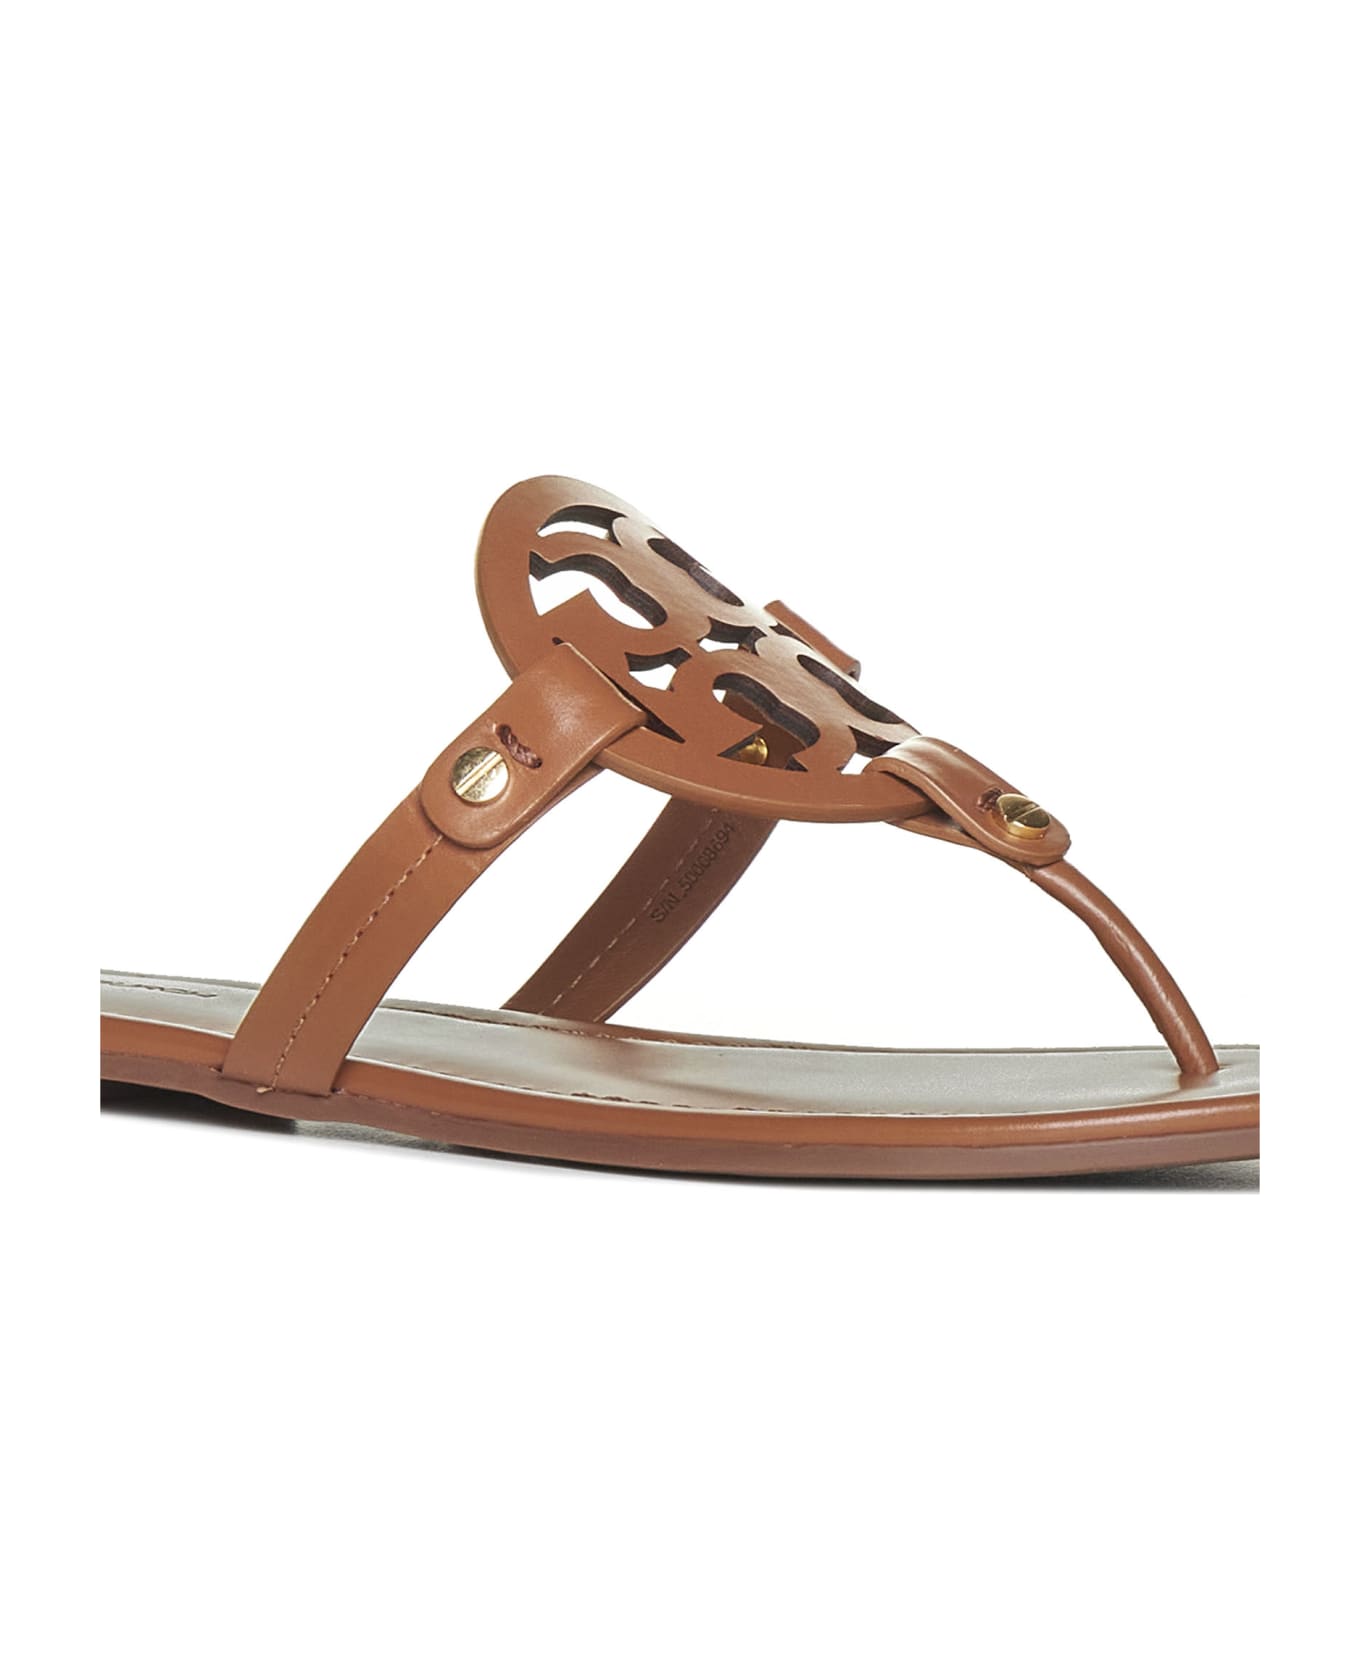 Tory Burch Miller Leather Sandals - Saddle Brown